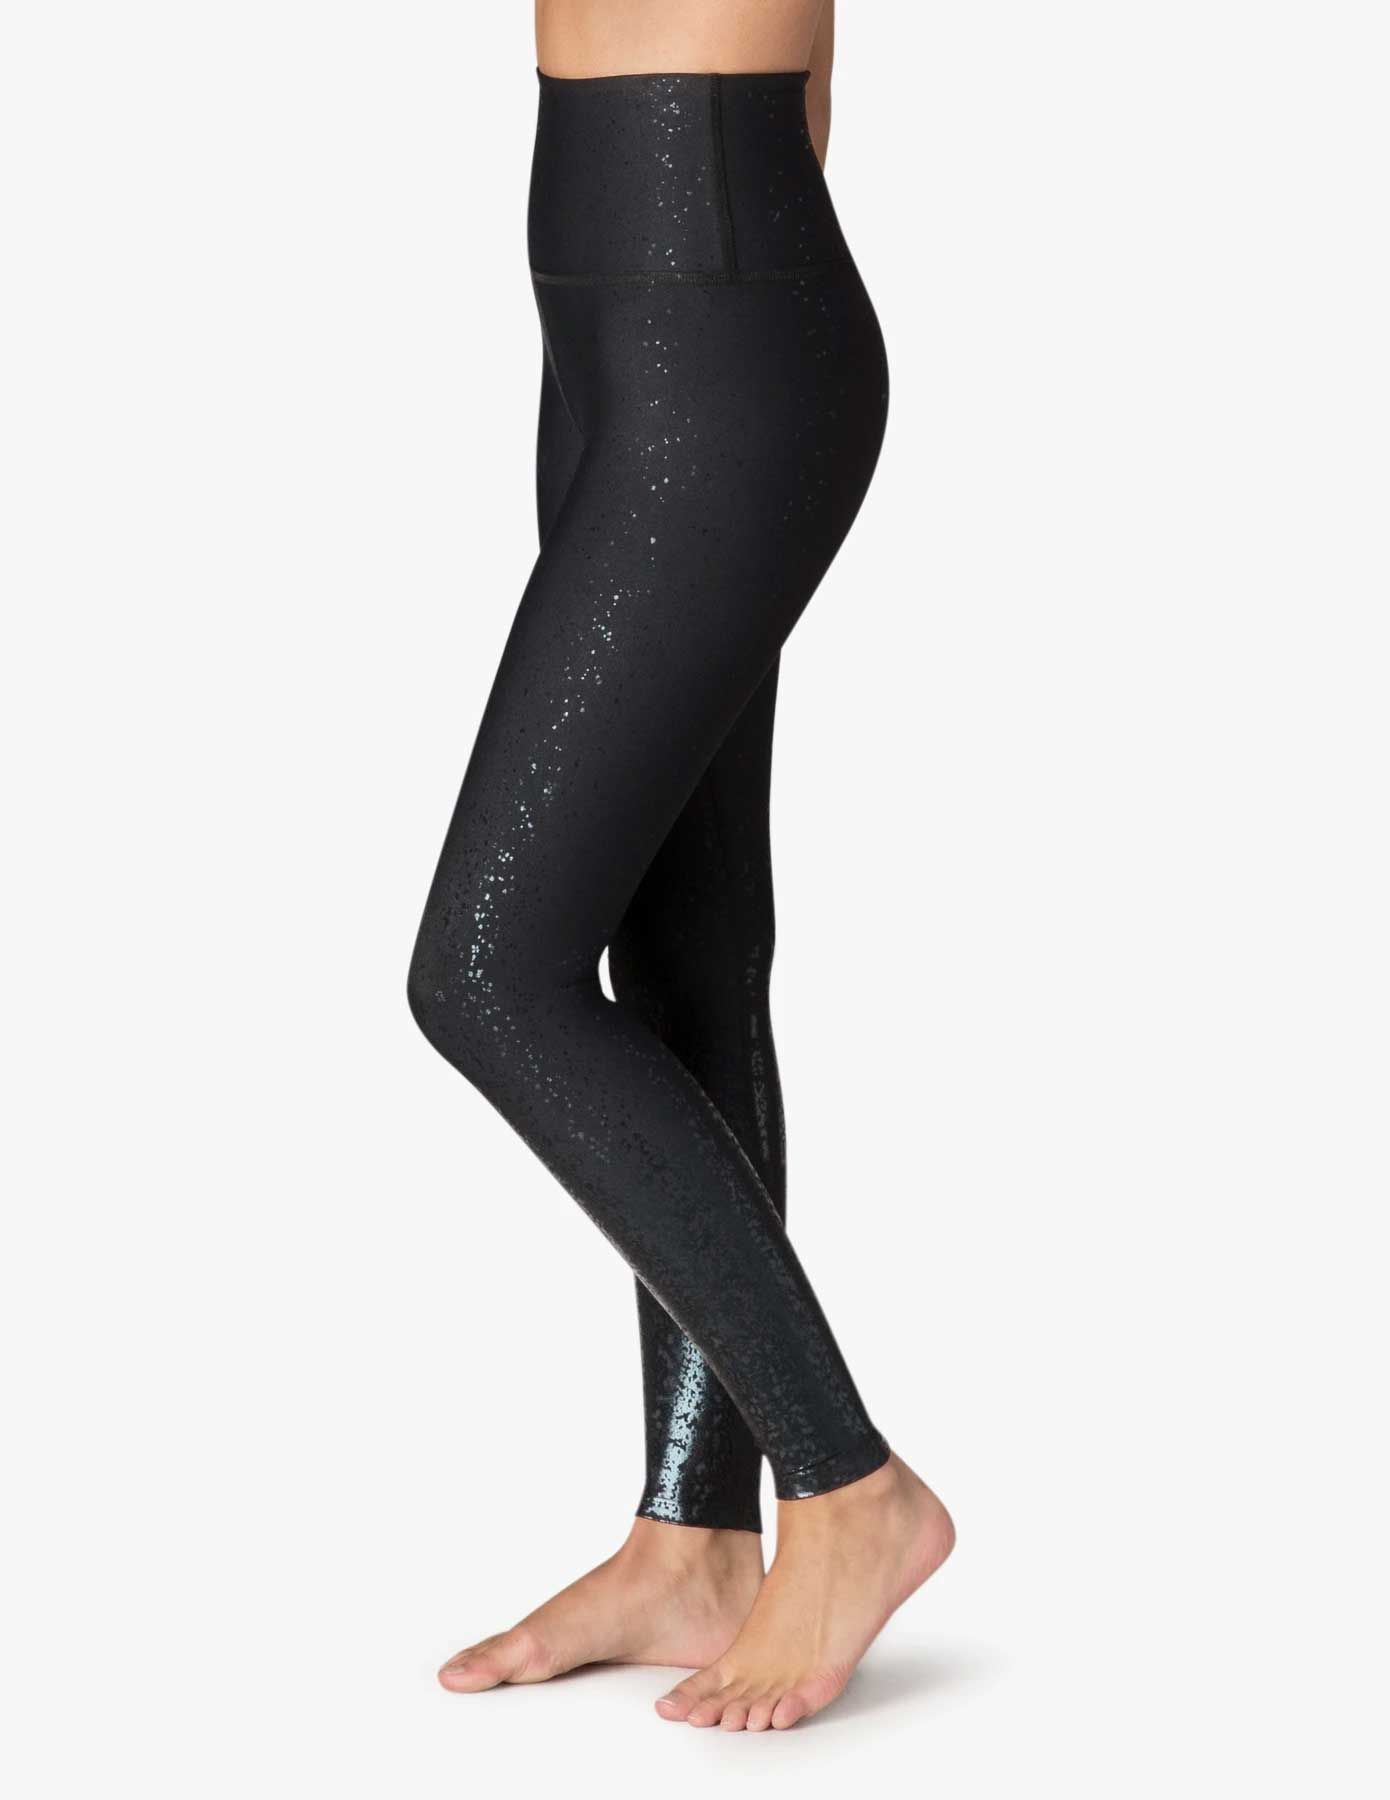 Beyond Yoga Alloy Ombre Leggings Black Size L - $75 New With Tags